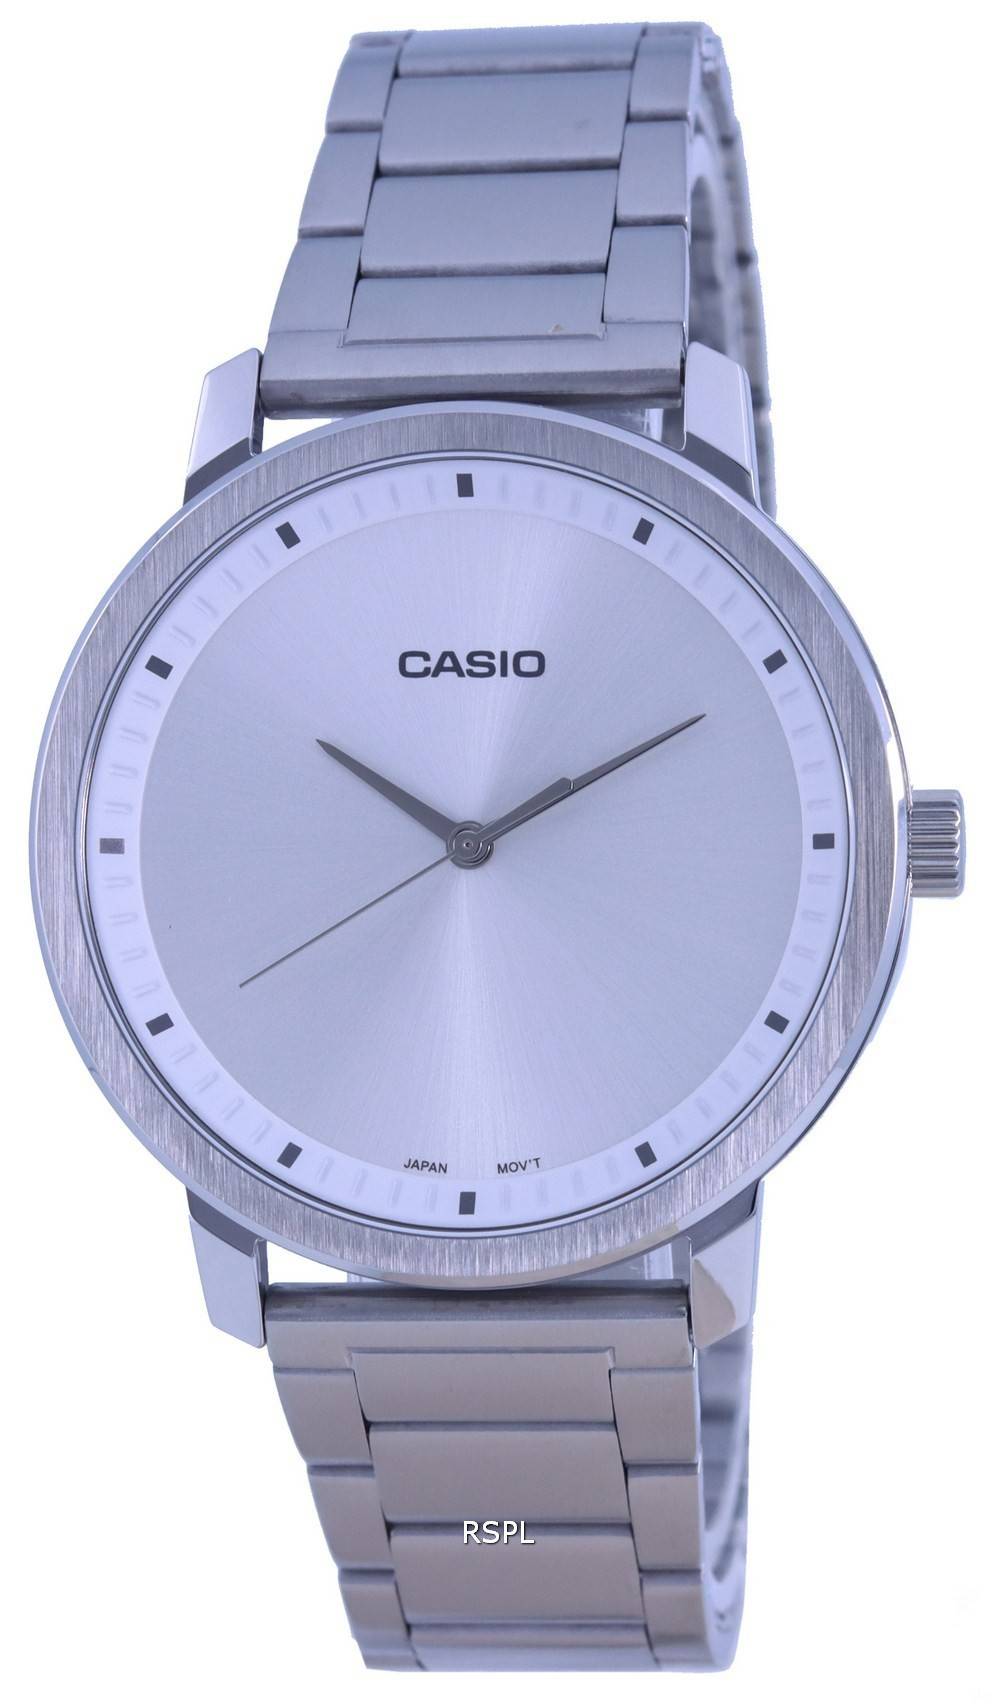 Casio Analog Silver Dial Stainless Steel MTP-B115D-7E MTPB115D-7 Mens Watch